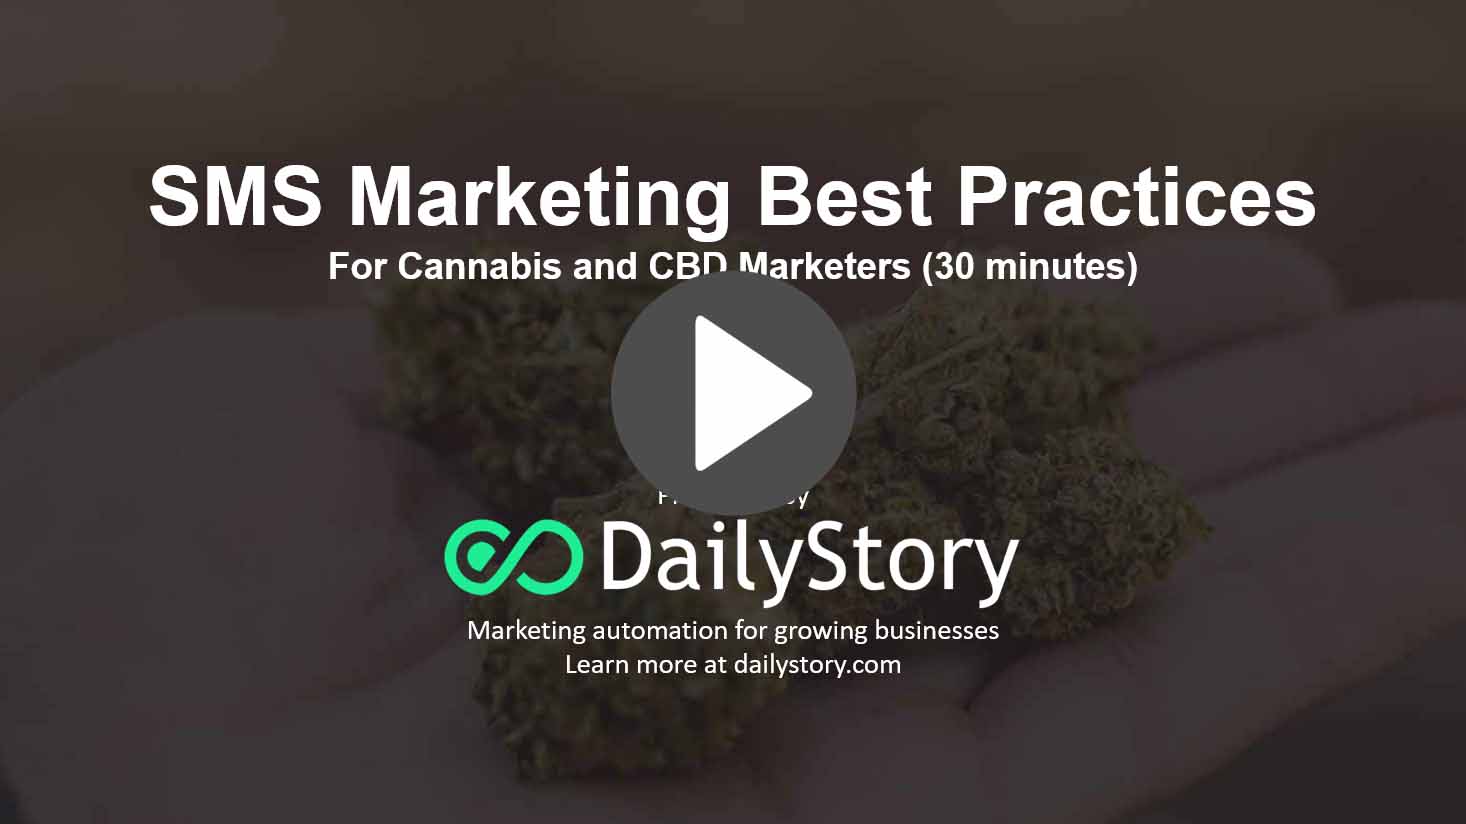 Webinar: SMS Marketing Best Practices for Cannabis and CBD Marketers